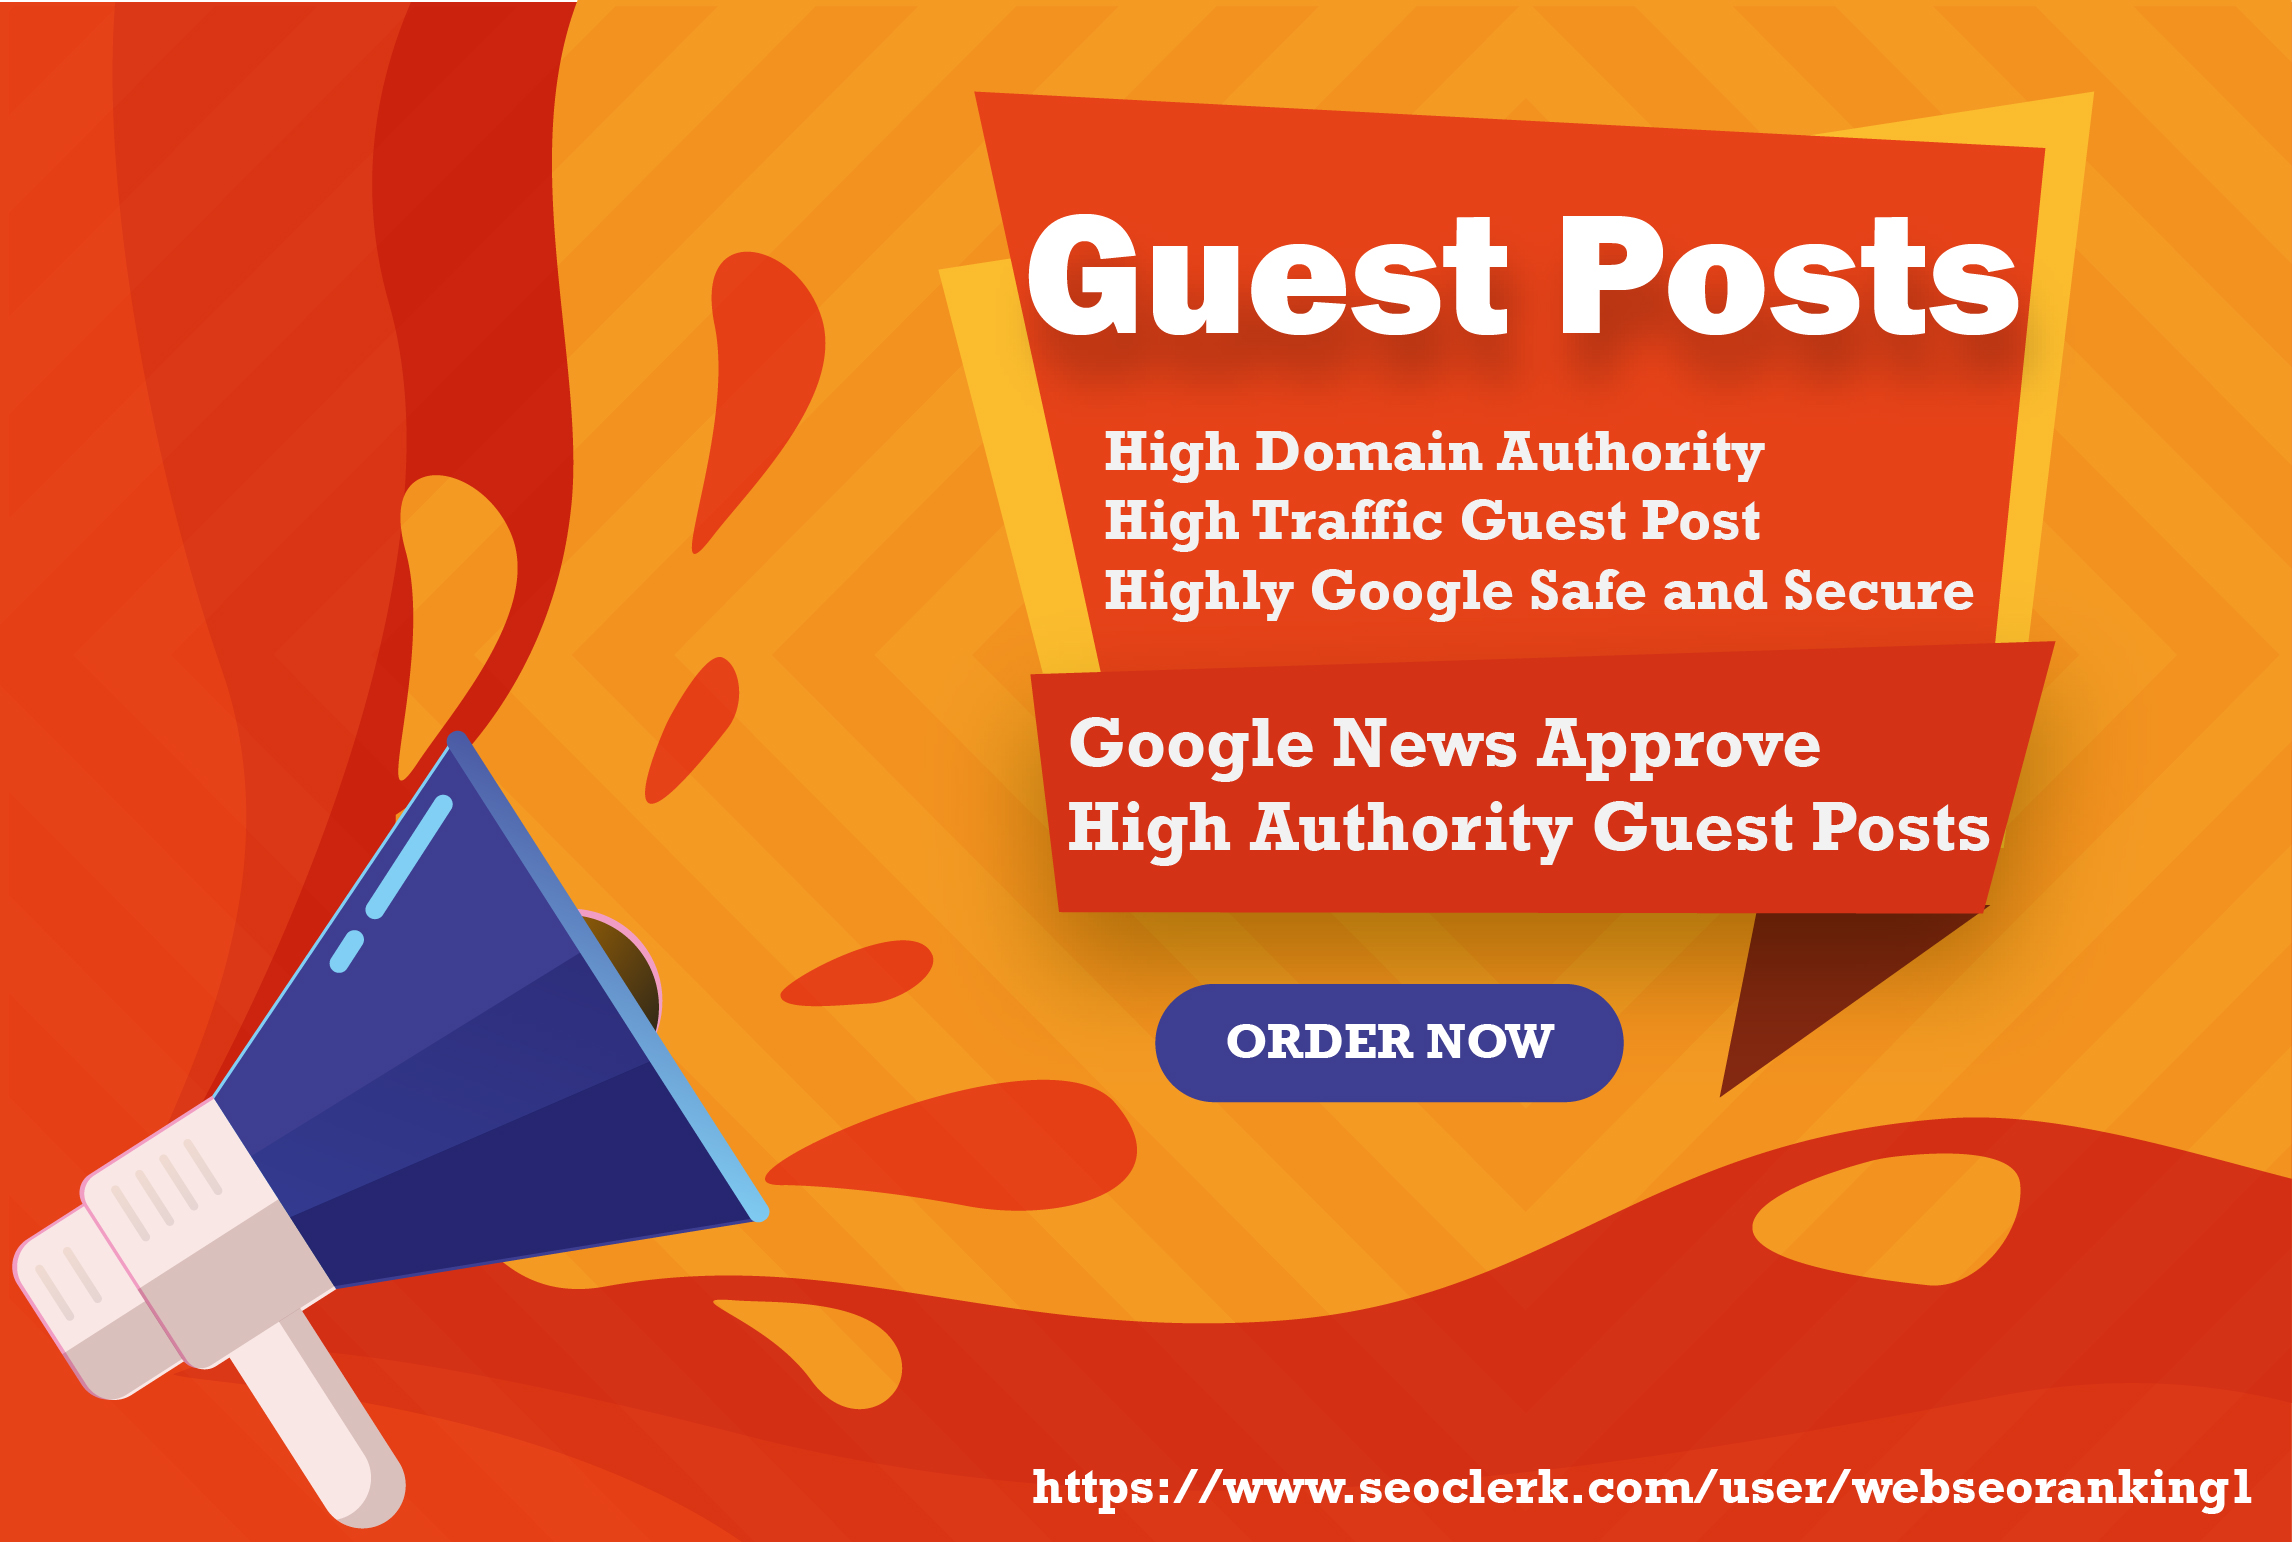 I Will Provide High Authority Google News Approve Guest Posts With Unique Content